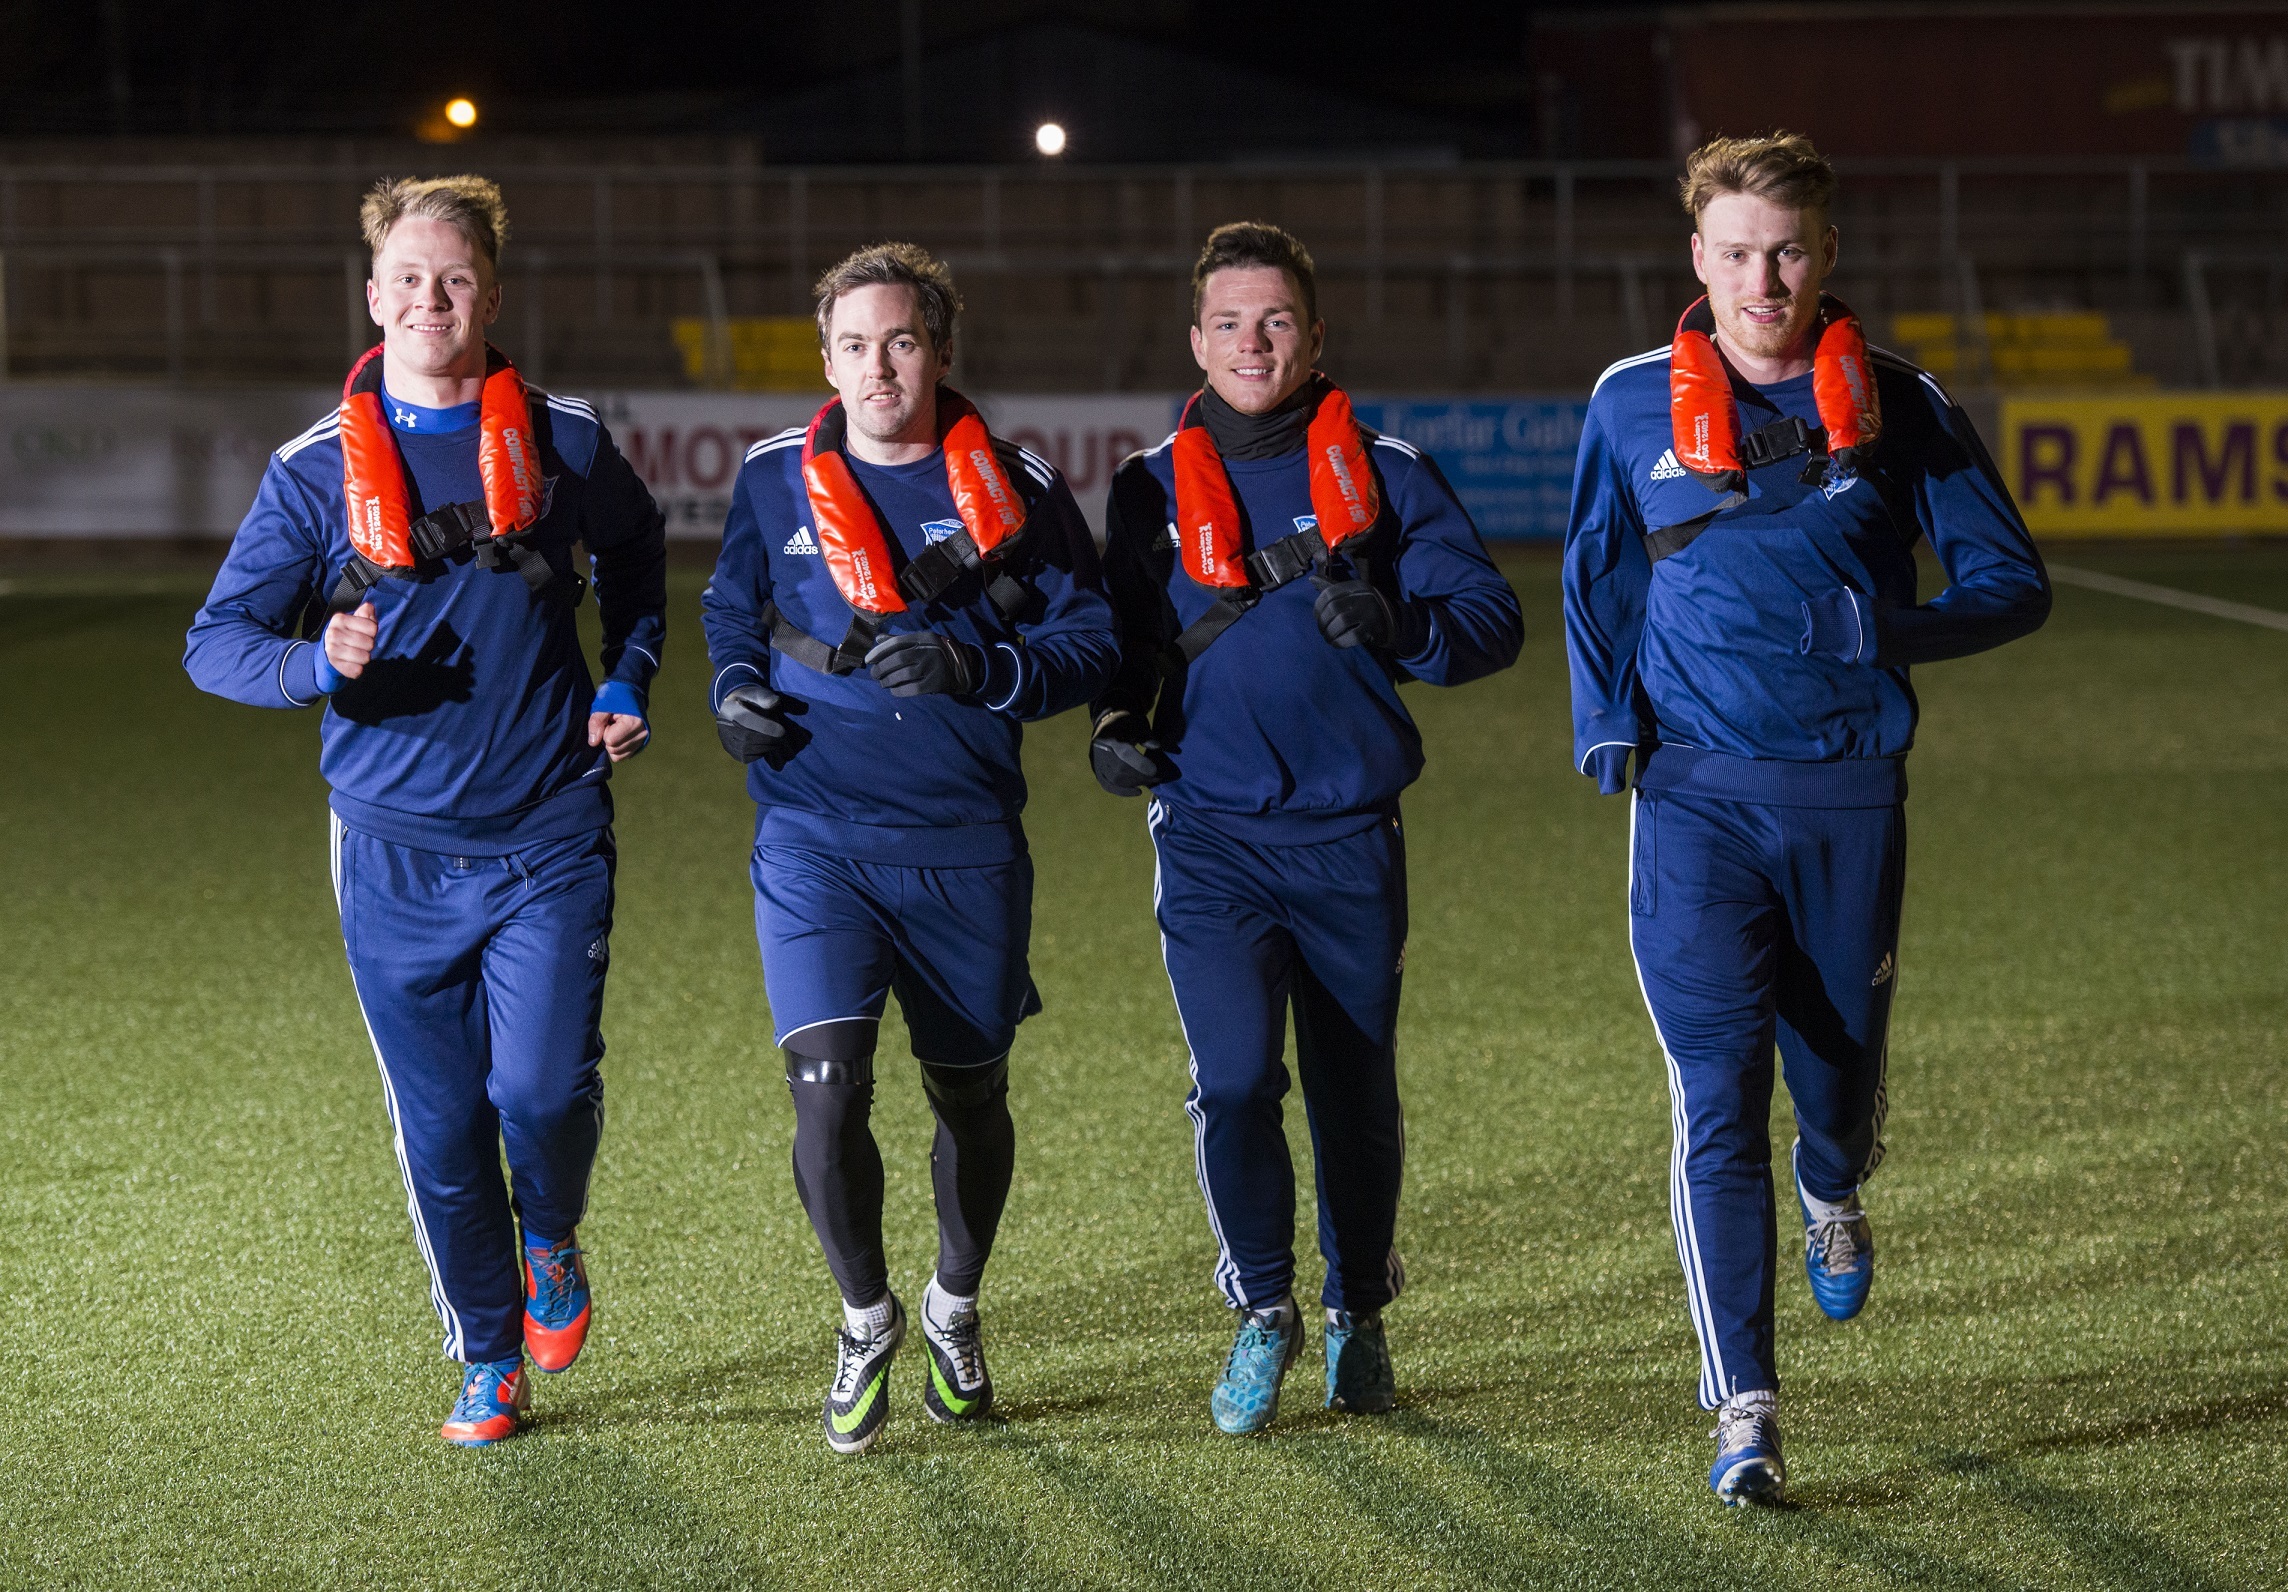 Pic Alan Richardson Dundee, Pix-AR.co.uk
Free to Use from Seafish
Peterhead FC Players  (ltoR) Ryan Strachan,Jamie Stevenson, David Cox and Rory McAllister train with the life preservers on